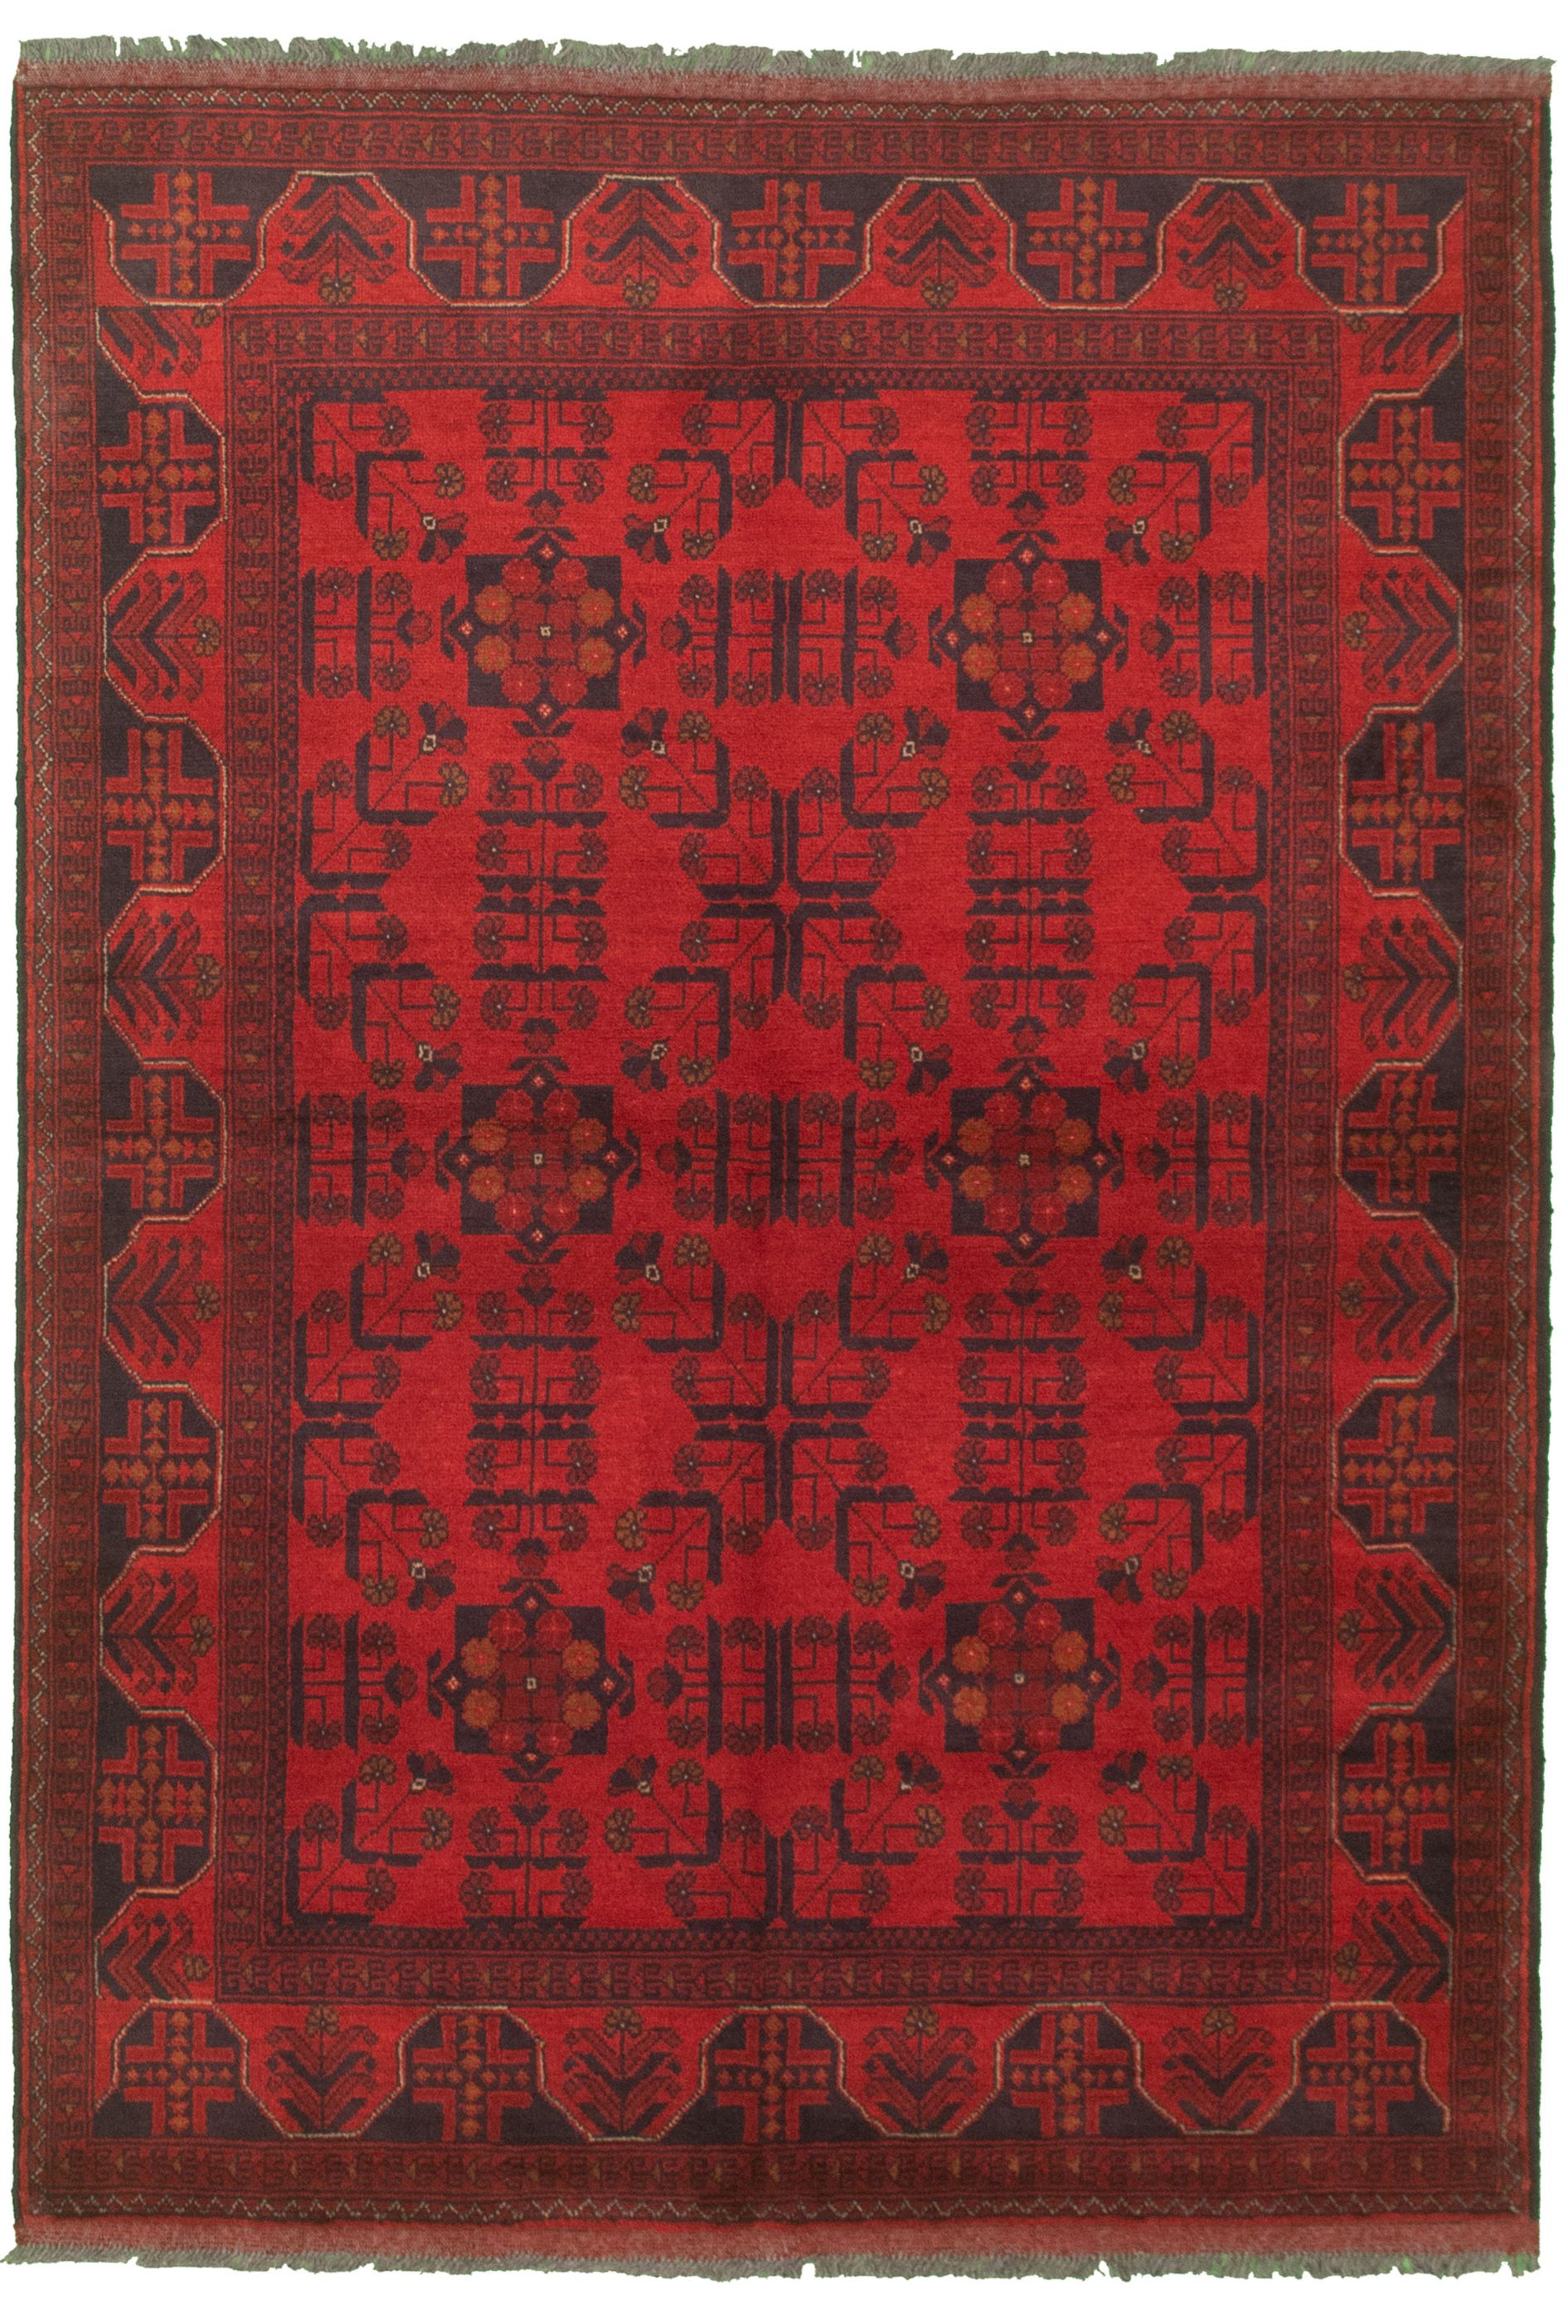 Hand-knotted Finest Khal Mohammadi Red Wool Rug 4'3" x 5'5" Size: 4'3" x 5'5"  